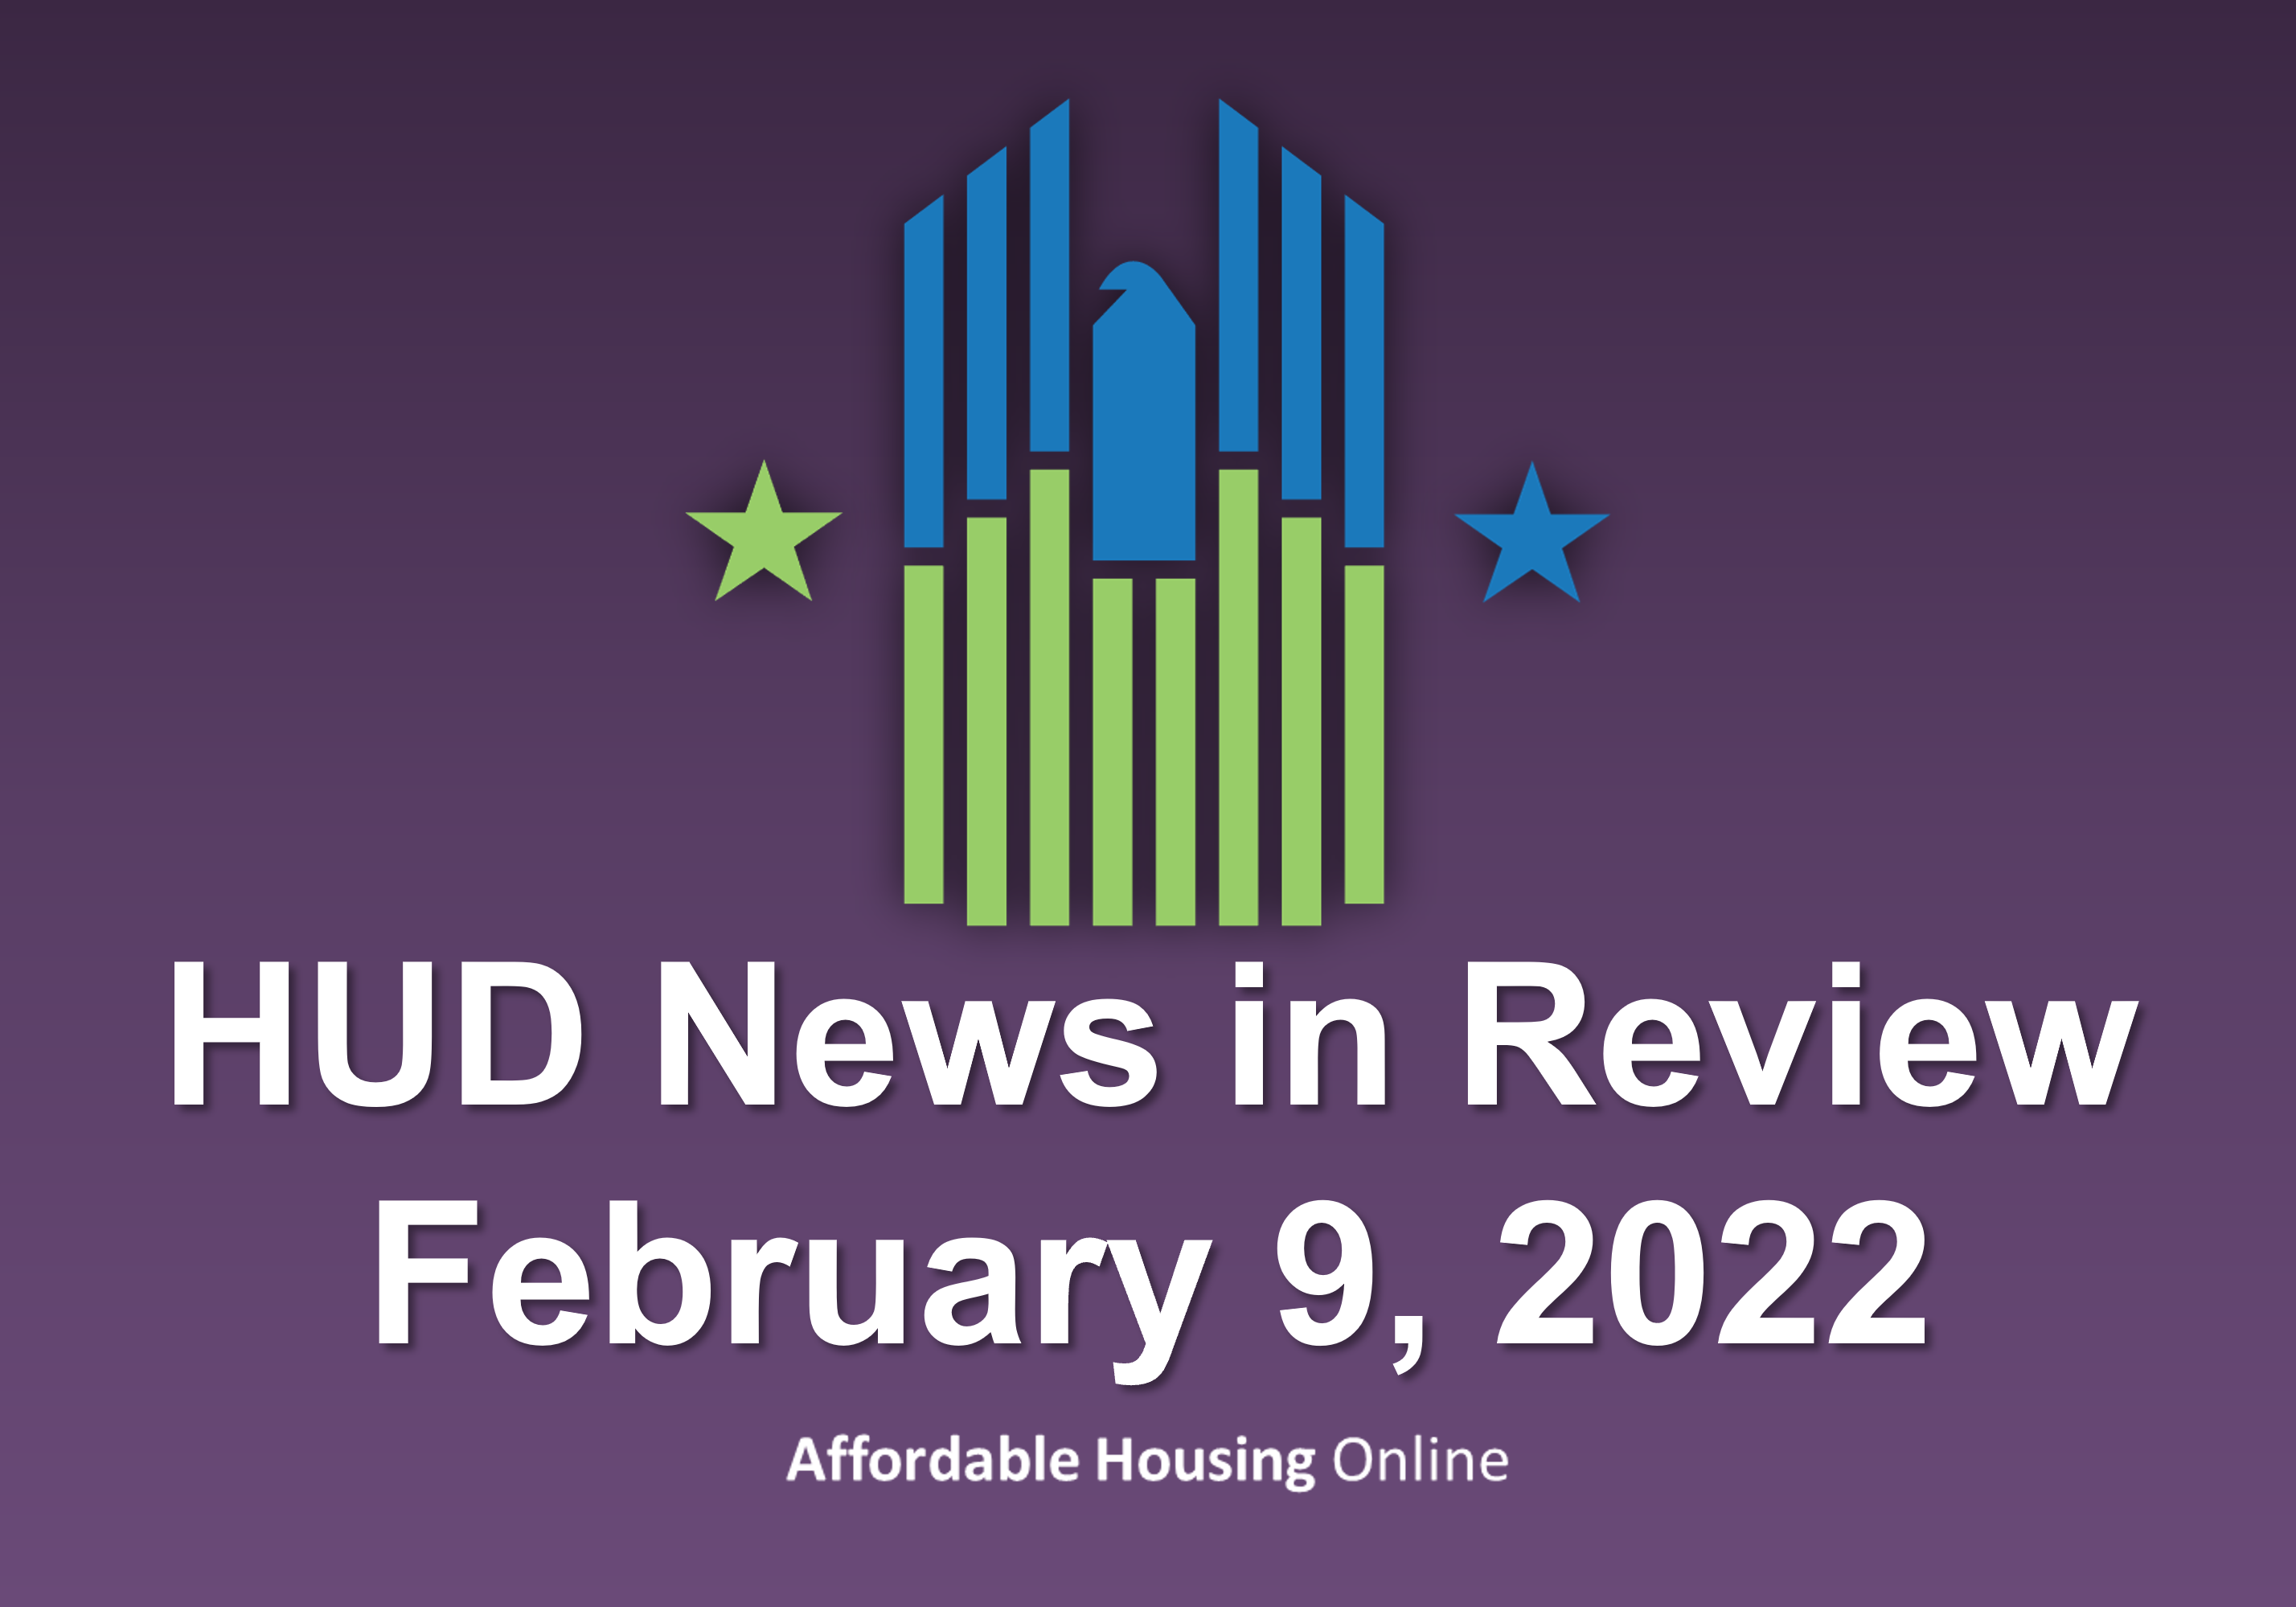 HUD News in Review: February 9, 2022